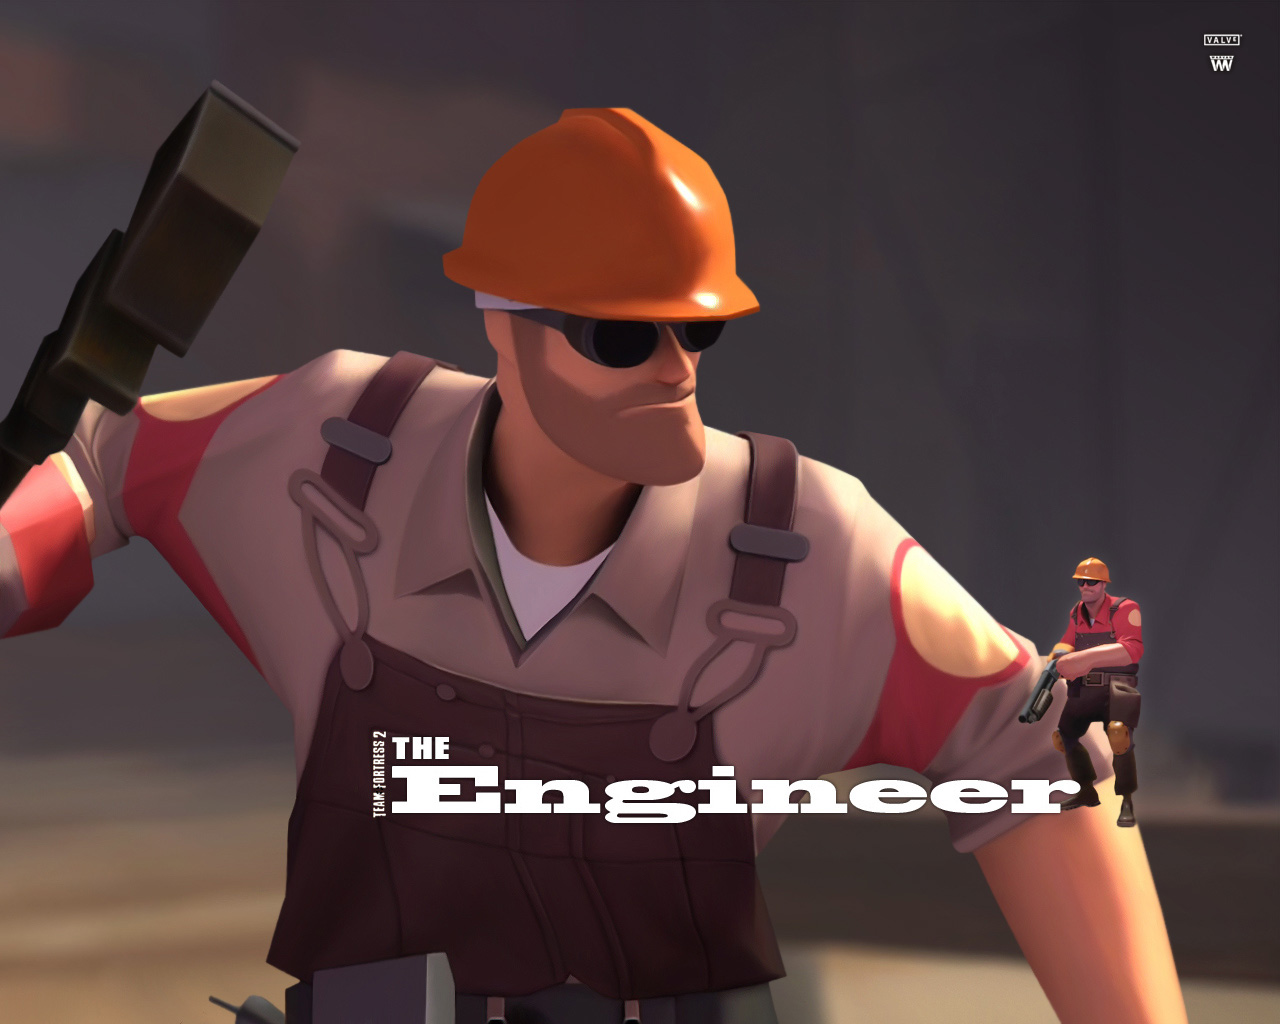 Engineer tf2 team fortress 2 video games wallpaper -